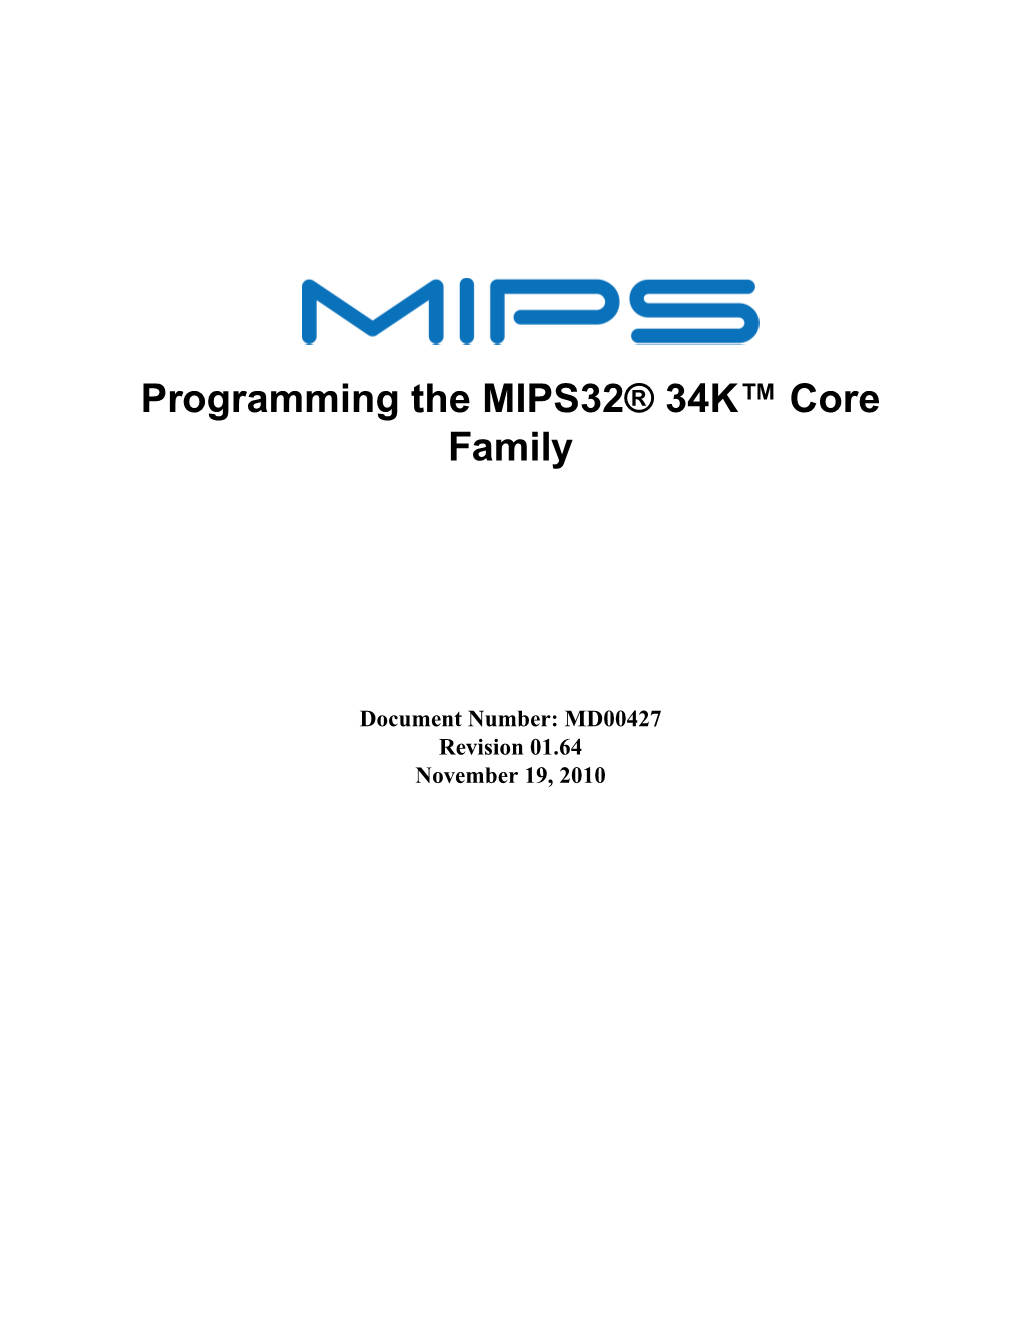 Programming the MIPS32® 34K™ Core Family, Revision 01.64